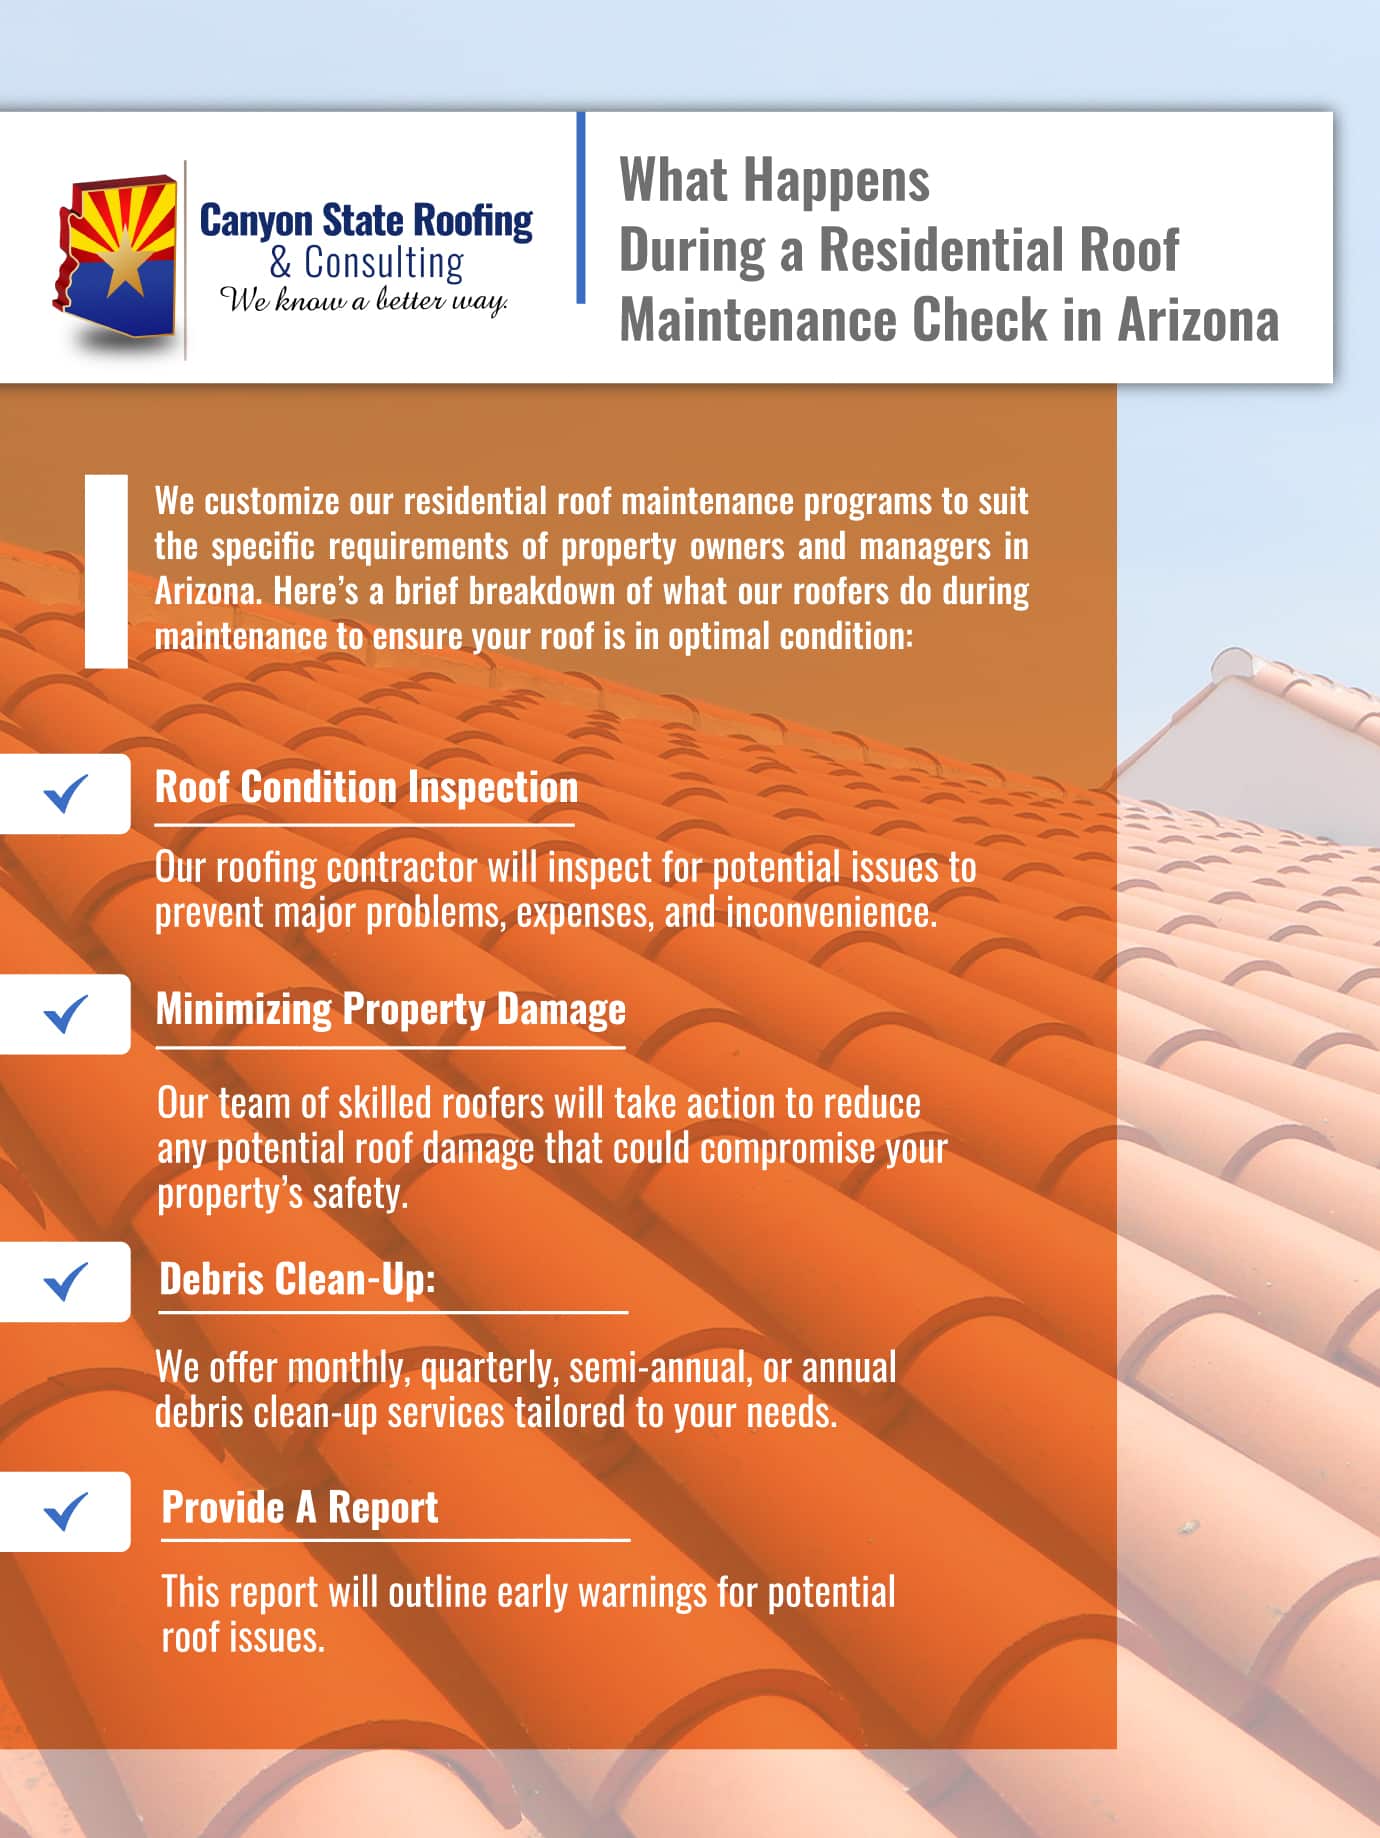 Infographic that shows what happens during a residential roof maintenance check in Arizona